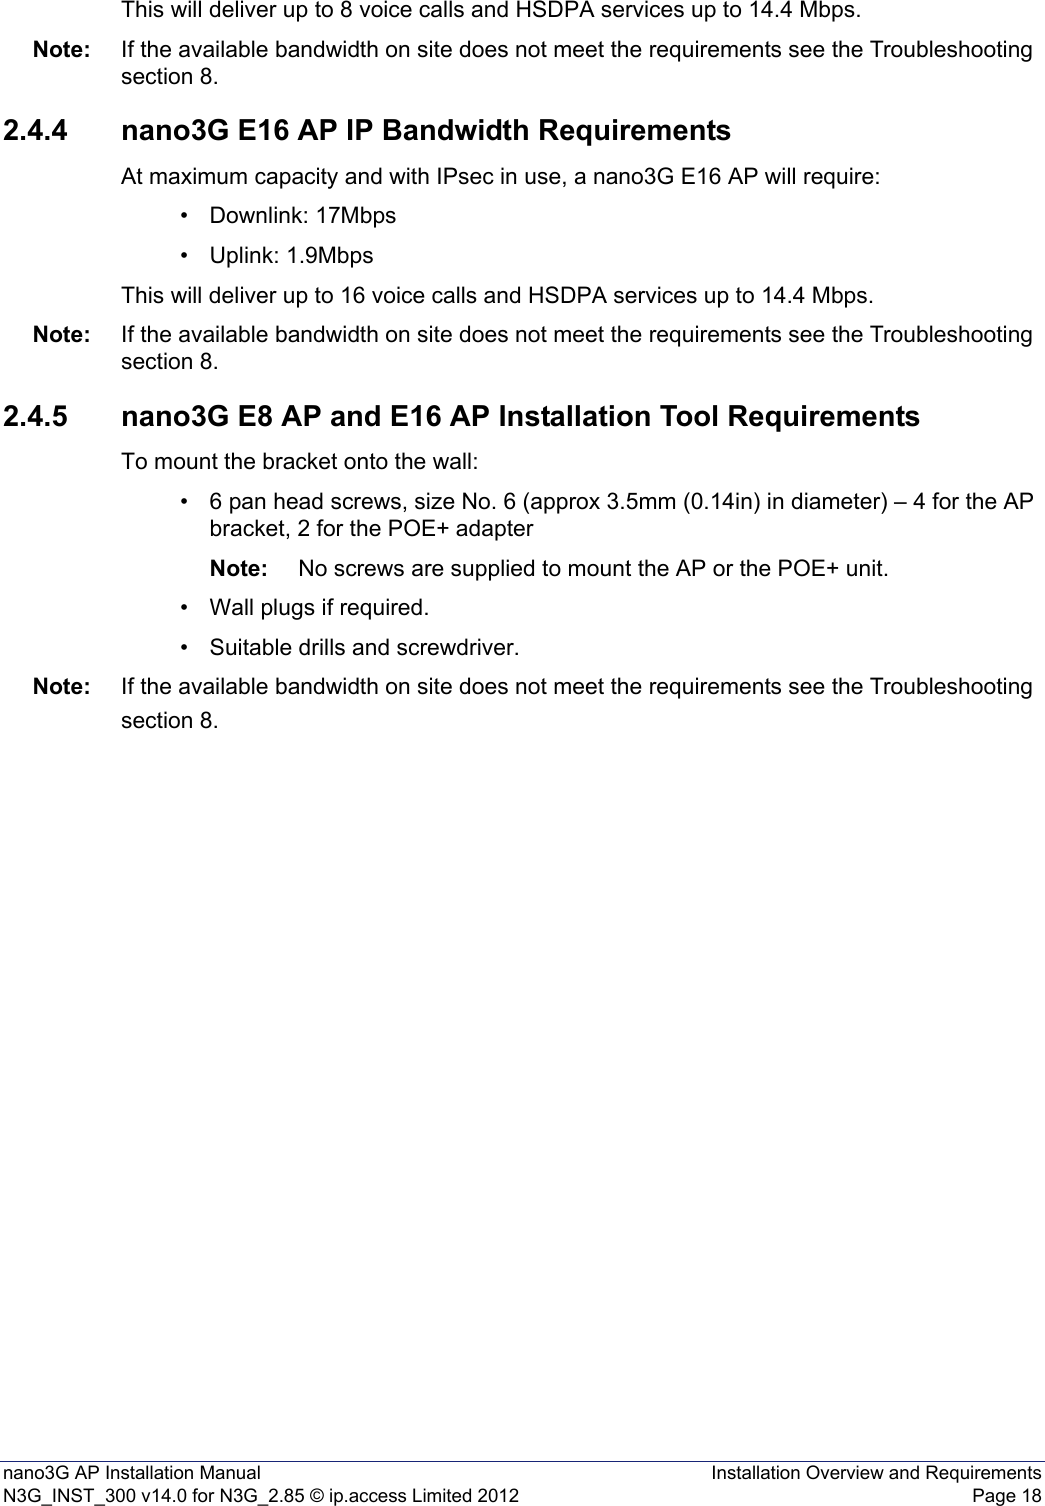 nano3G AP Installation Manual Installation Overview and RequirementsN3G_INST_300 v14.0 for N3G_2.85 © ip.access Limited 2012 Page 18This will deliver up to 8 voice calls and HSDPA services up to 14.4 Mbps.Note: If the available bandwidth on site does not meet the requirements see the Troubleshooting section 8.2.4.4 nano3G E16 AP IP Bandwidth RequirementsAt maximum capacity and with IPsec in use, a nano3G E16 AP will require:• Downlink: 17Mbps• Uplink: 1.9MbpsThis will deliver up to 16 voice calls and HSDPA services up to 14.4 Mbps.Note: If the available bandwidth on site does not meet the requirements see the Troubleshooting section 8.2.4.5 nano3G E8 AP and E16 AP Installation Tool RequirementsTo mount the bracket onto the wall:• 6 pan head screws, size No. 6 (approx 3.5mm (0.14in) in diameter) – 4 for the AP bracket, 2 for the POE+ adapterNote: No screws are supplied to mount the AP or the POE+ unit.• Wall plugs if required.• Suitable drills and screwdriver.Note: If the available bandwidth on site does not meet the requirements see the Troubleshooting section 8.